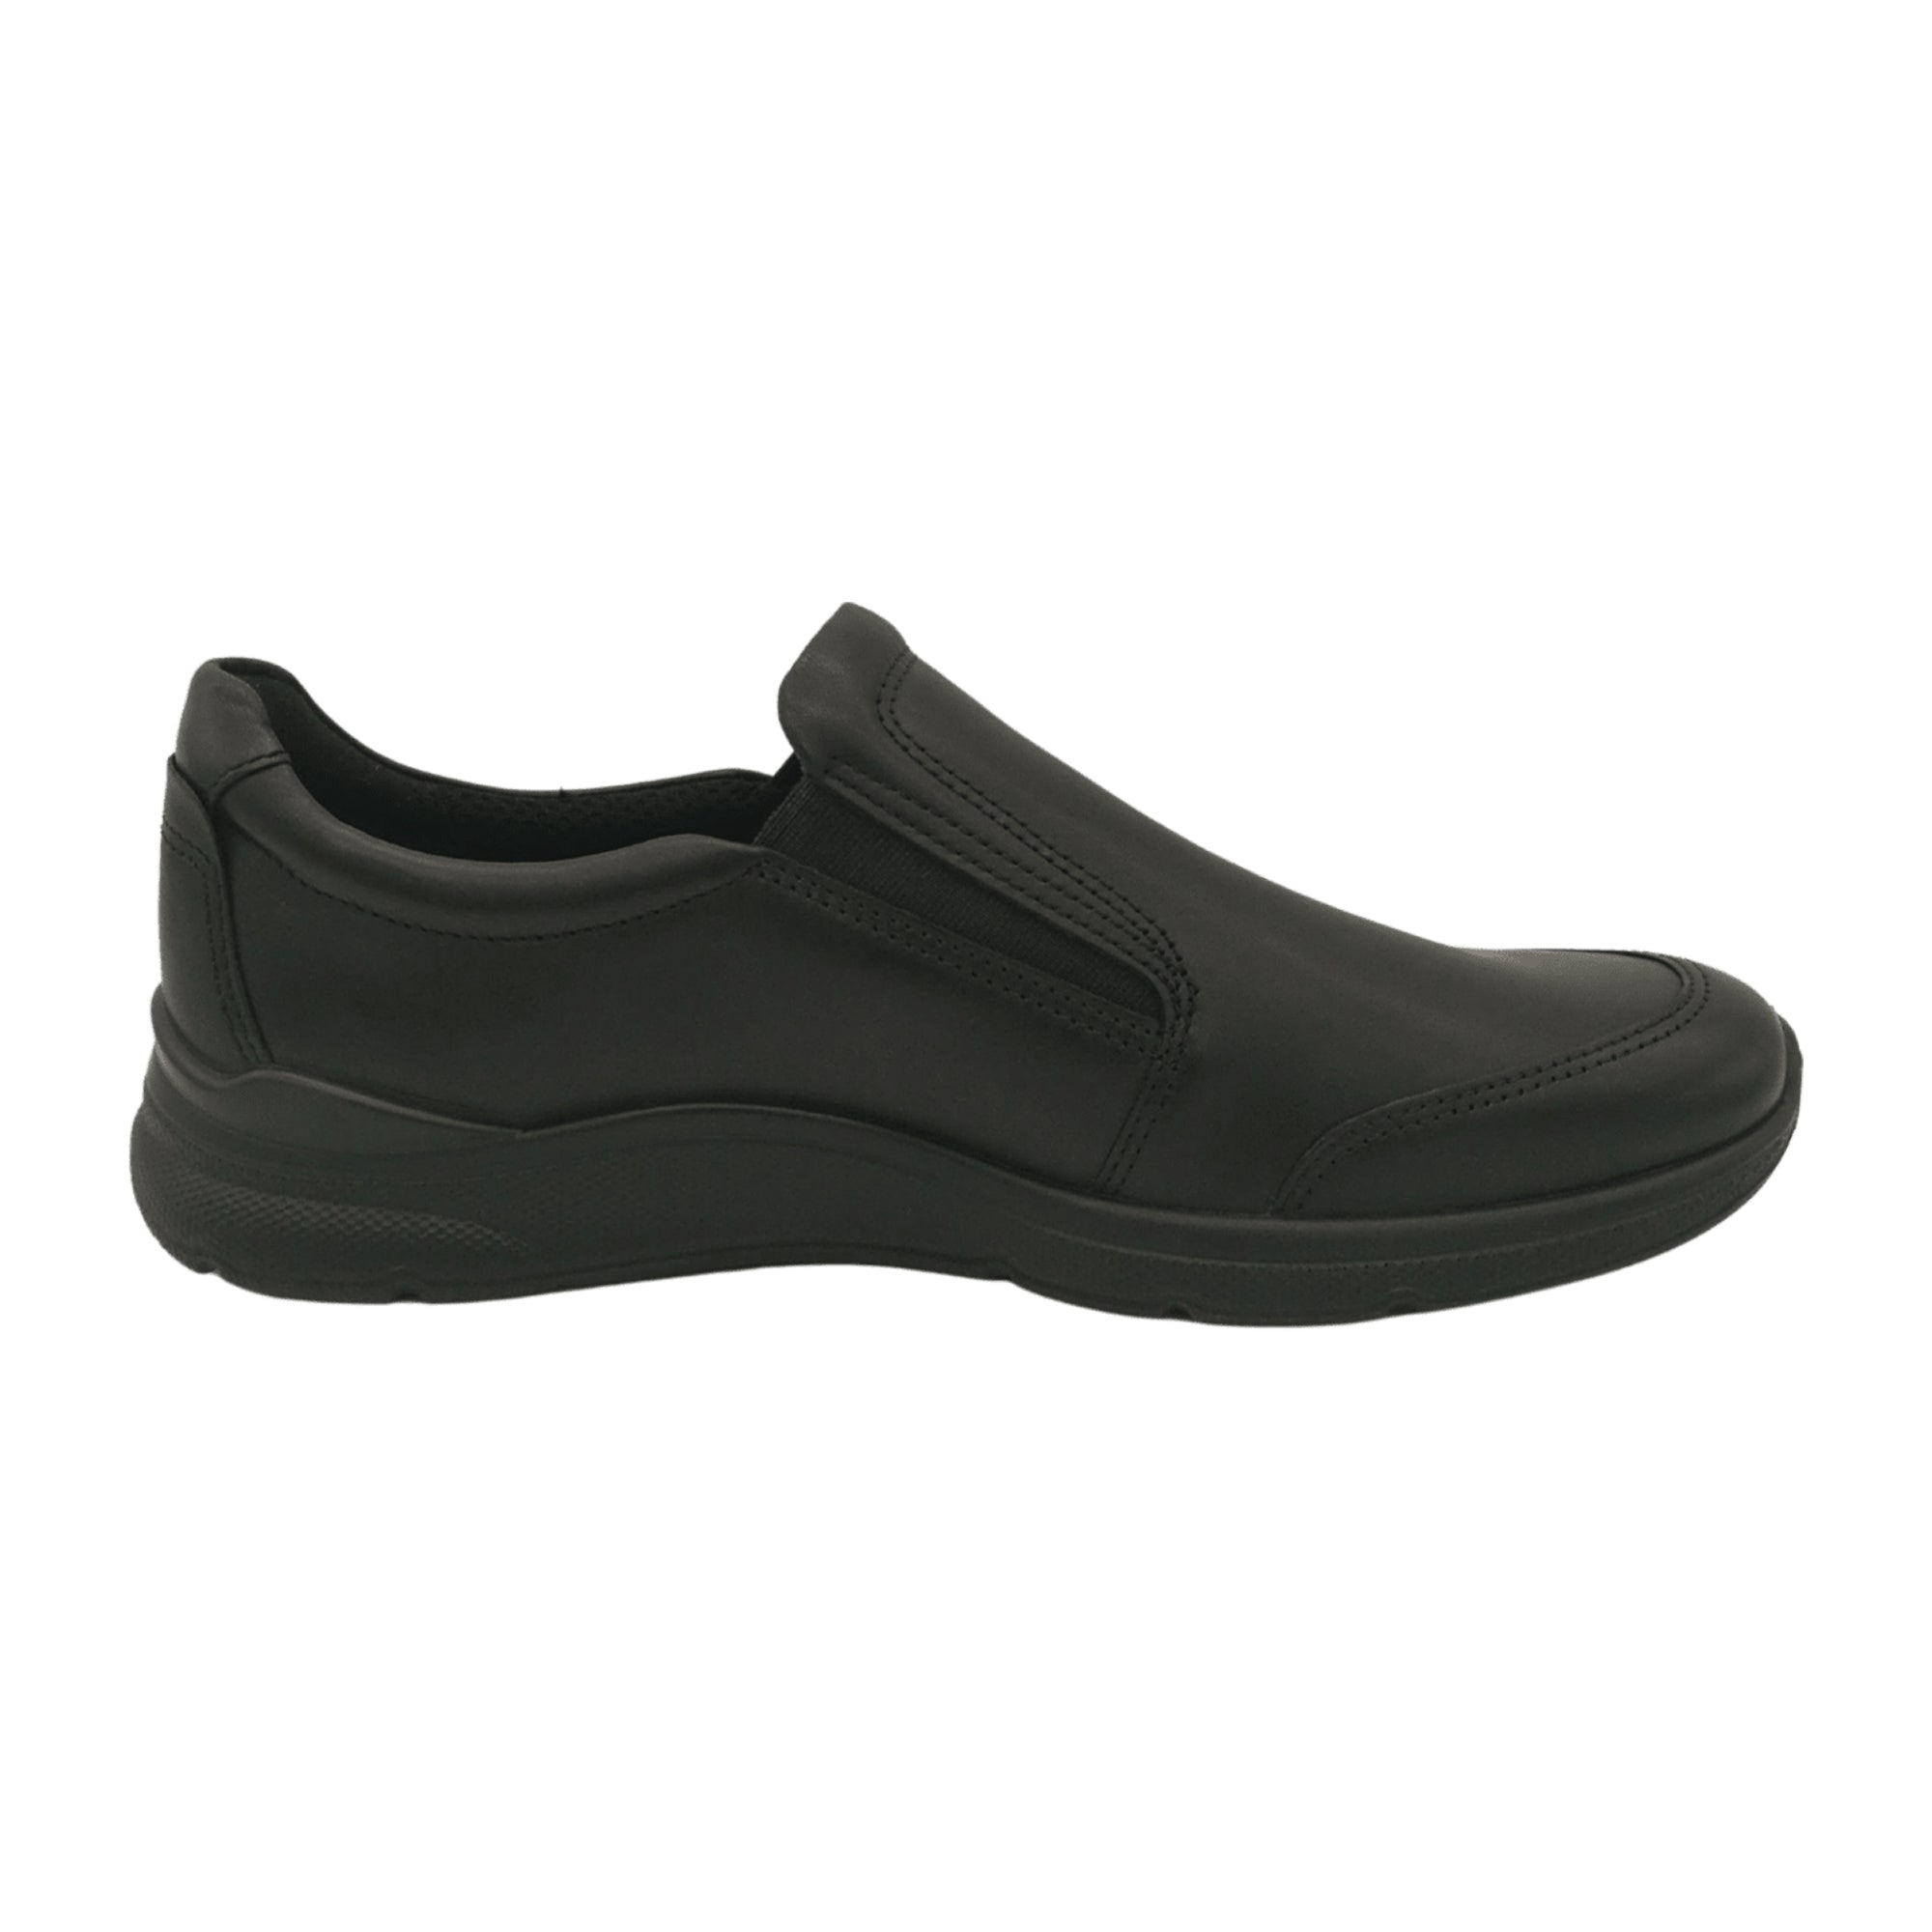 Ecco Irving Men's Black Casual Shoes - Durable & Stylish